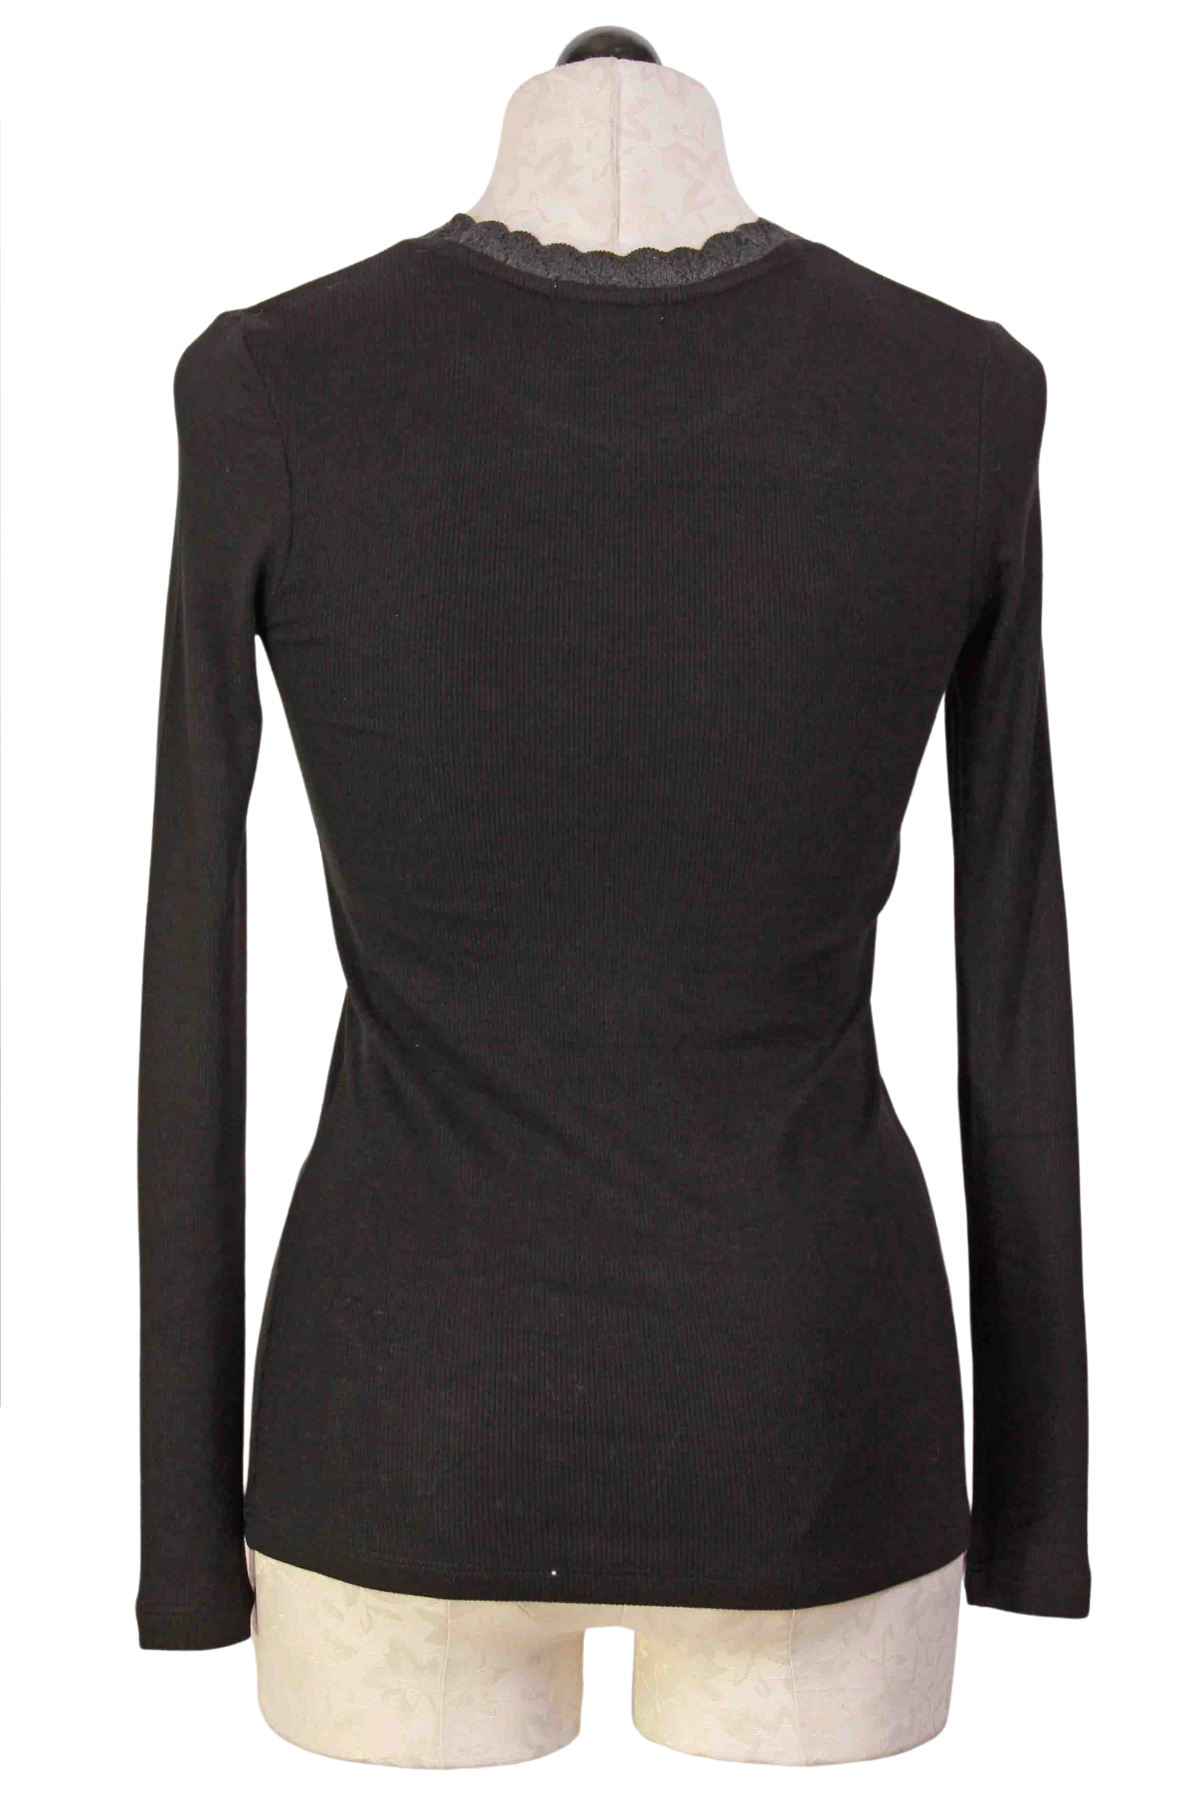 Back view of Black/Charcoal Grey Soft Long Sleeve Pointelle Trim Rib Tee by Goldie LeWinter